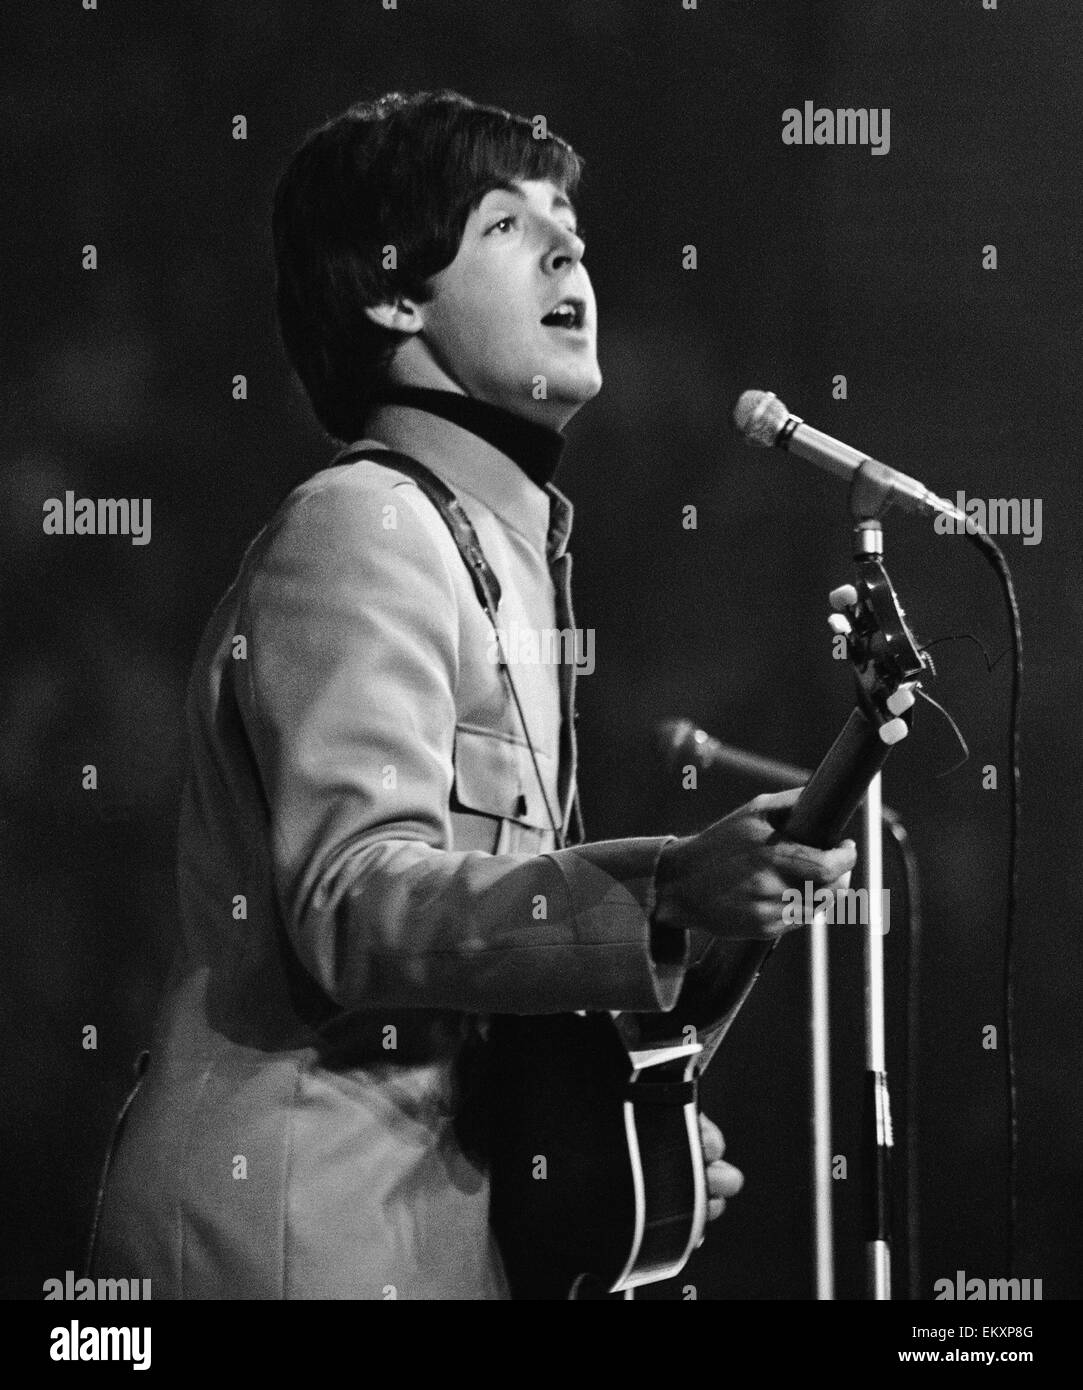 New Musical Express pop concert at Empire Pool Wembley 11th April 1965. The annual IPC New Musical Express concert featured poll winners & guest artists including: The Beatles Pictured: Paul McCartney beatexhib12 Stock Photo